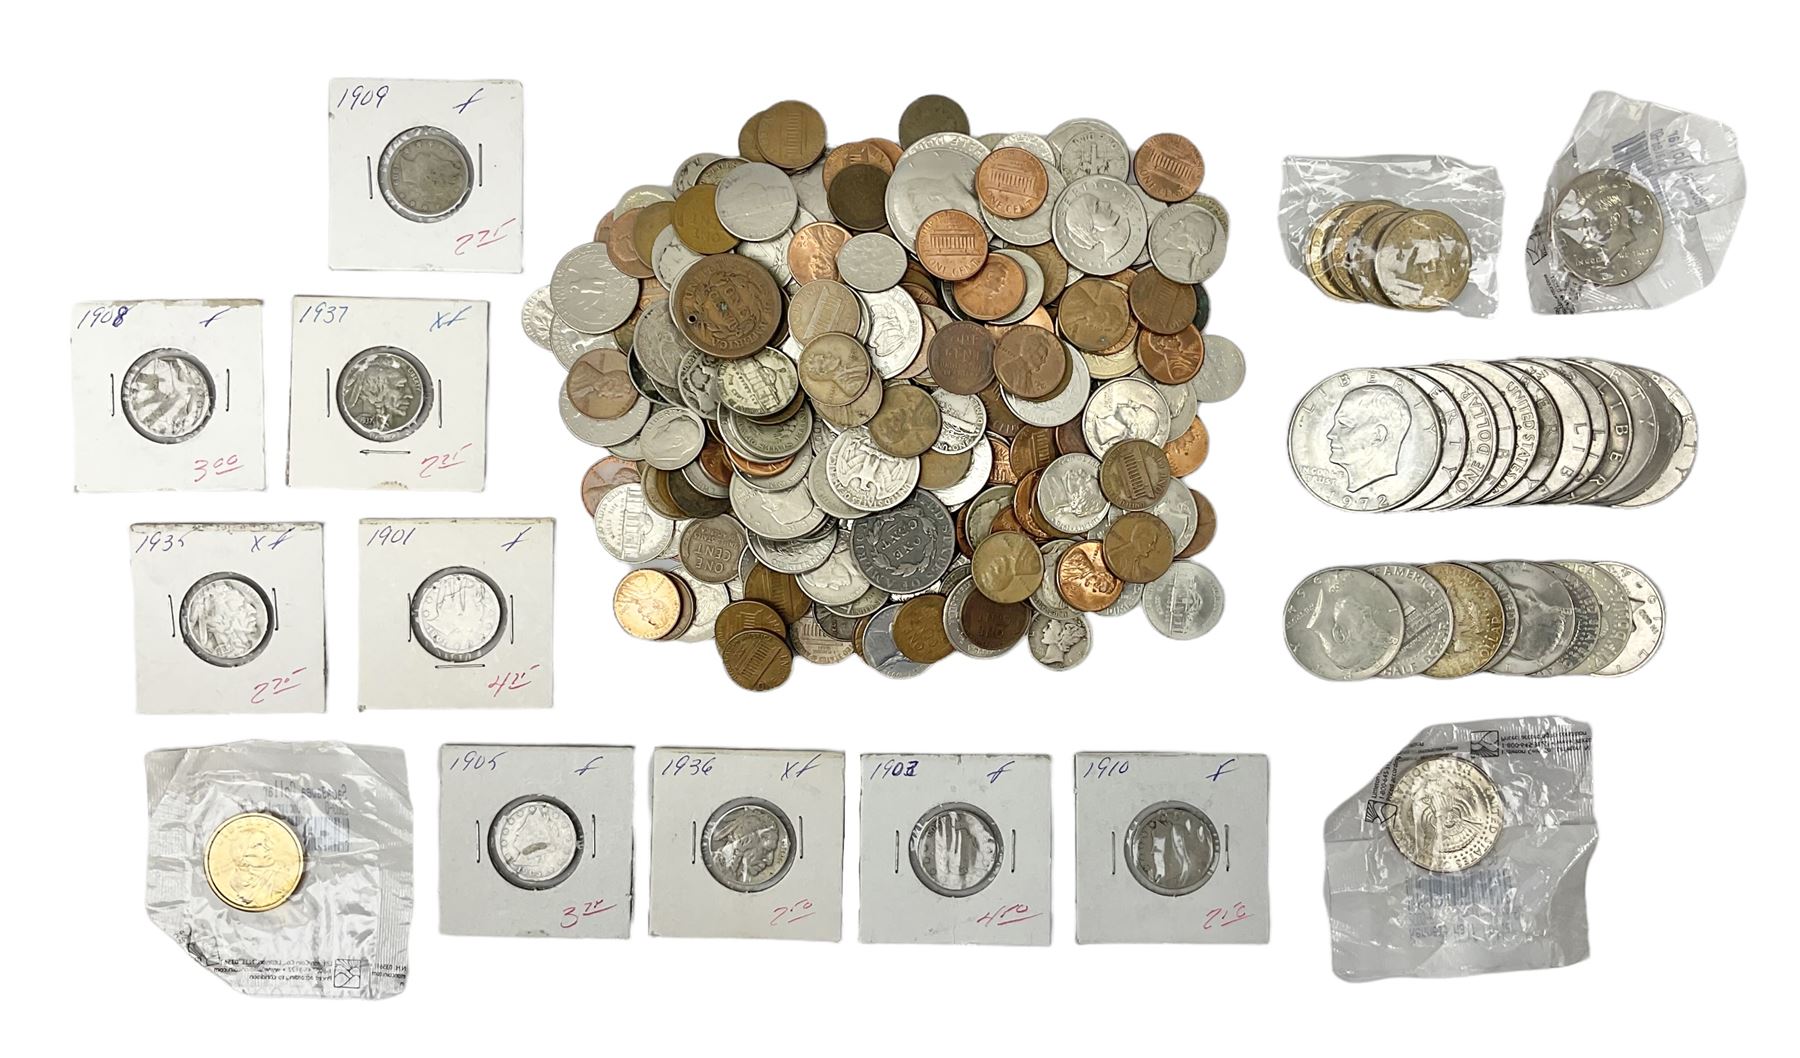 Mostly United States of America coinage